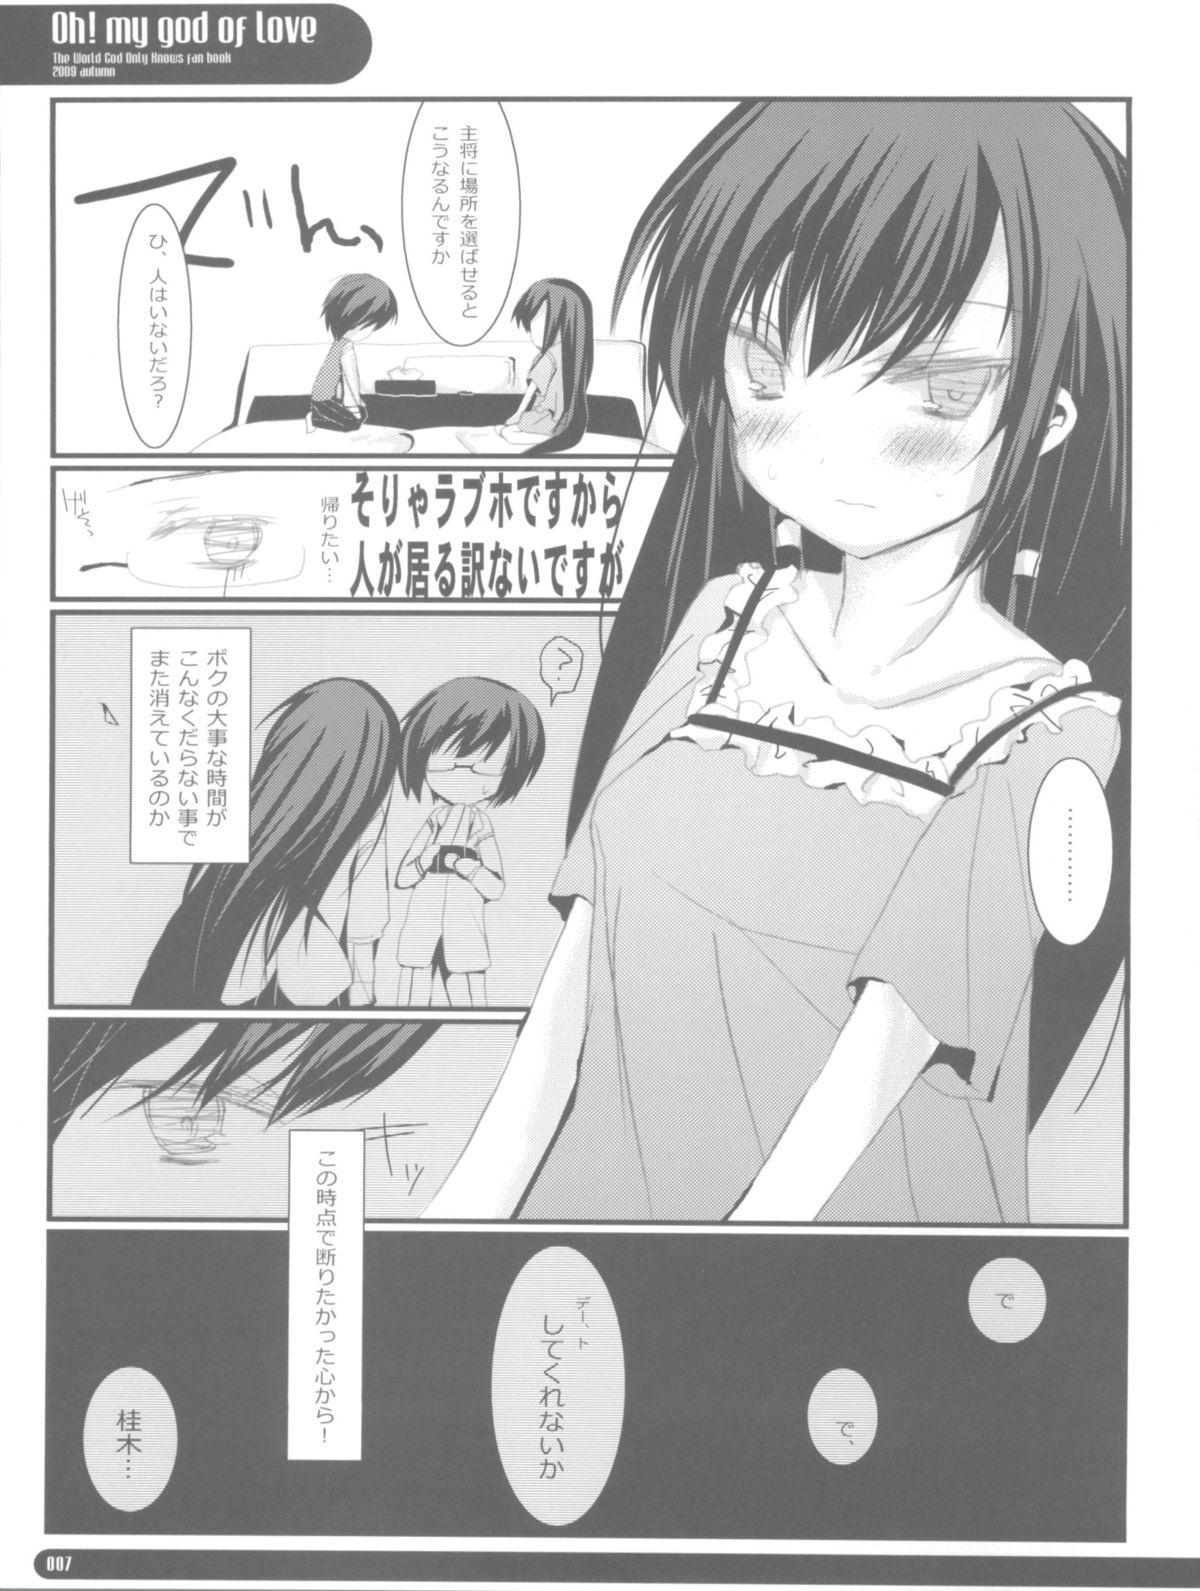 Anal Licking OH!MY GOD OF LOVE - The world god only knows Assgape - Page 7